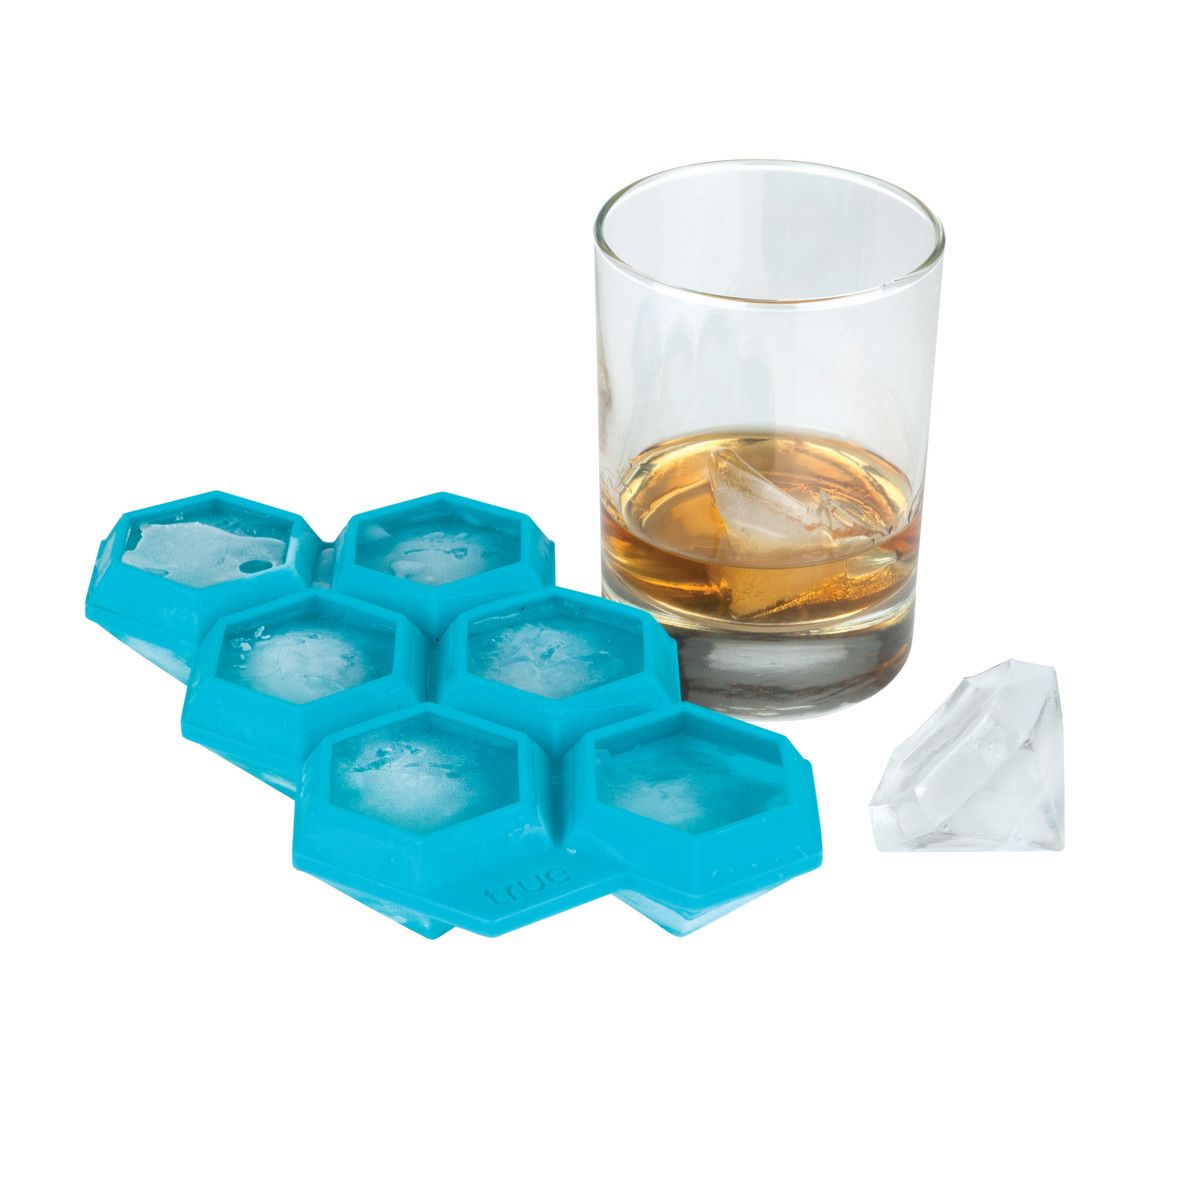 Large Blue Ice Cube Tray, Set of 2 Silicone Ice Trays By Scotch Rocks